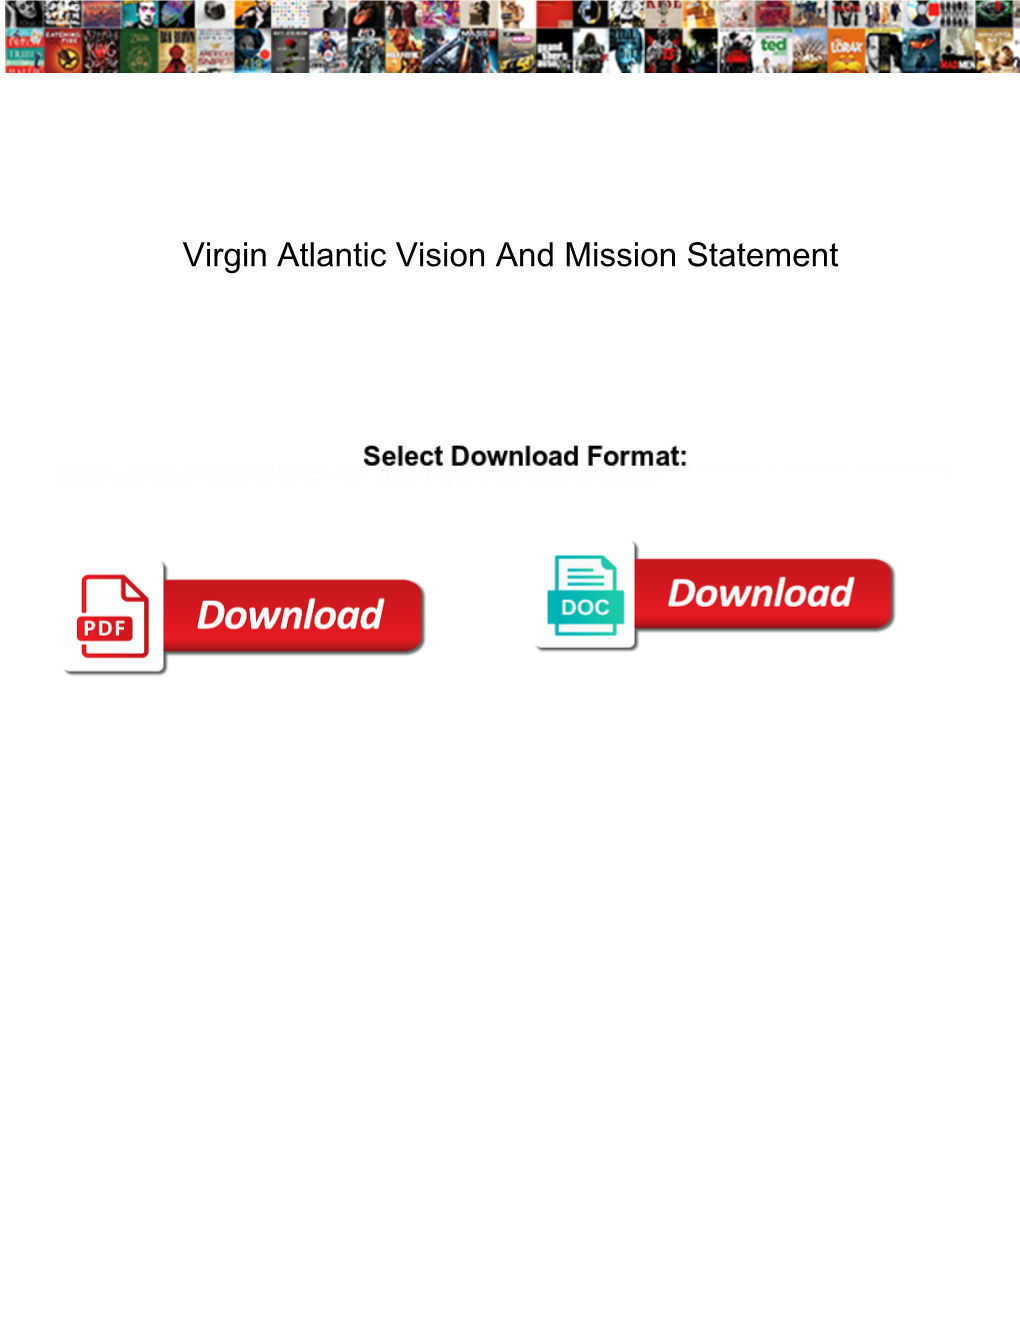 Virgin Atlantic Vision and Mission Statement